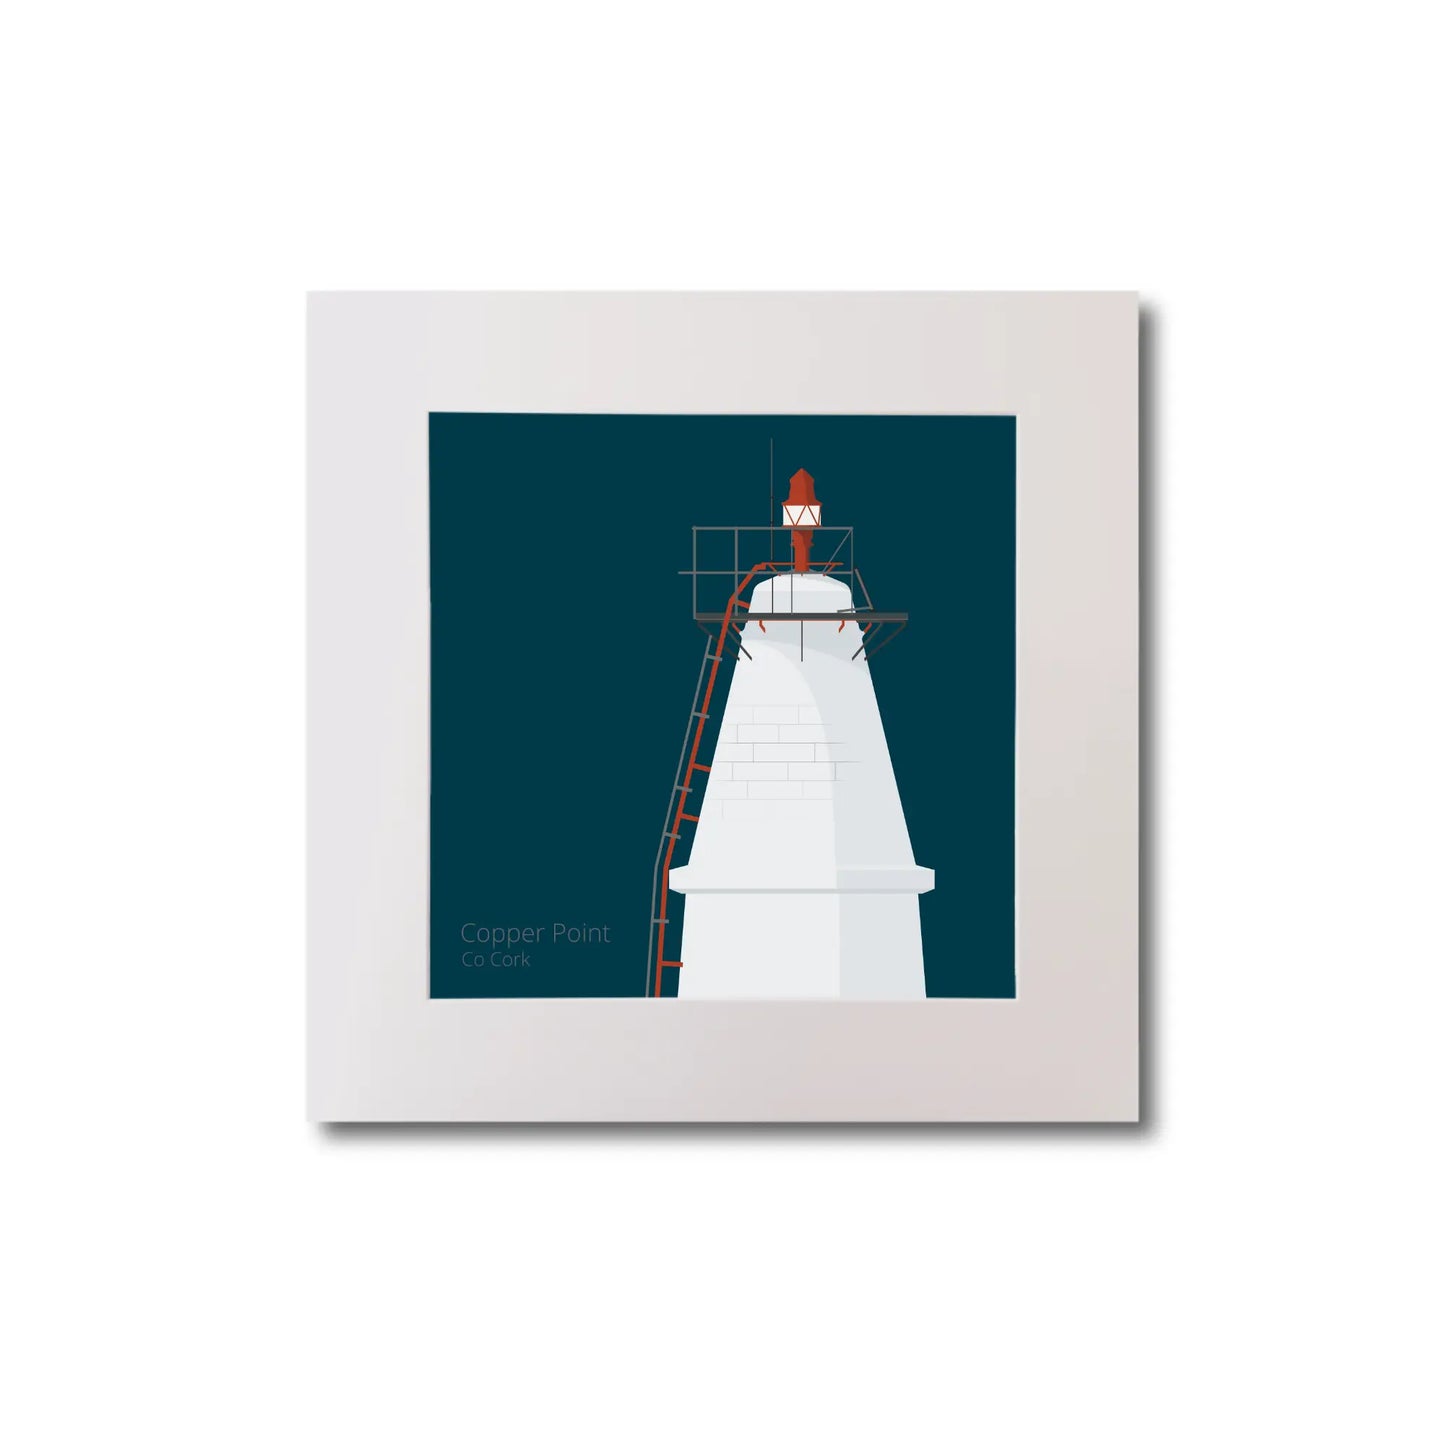 Illustration Copper Point lighthouse on a midnight blue background, mounted and measuring 20x20cm.